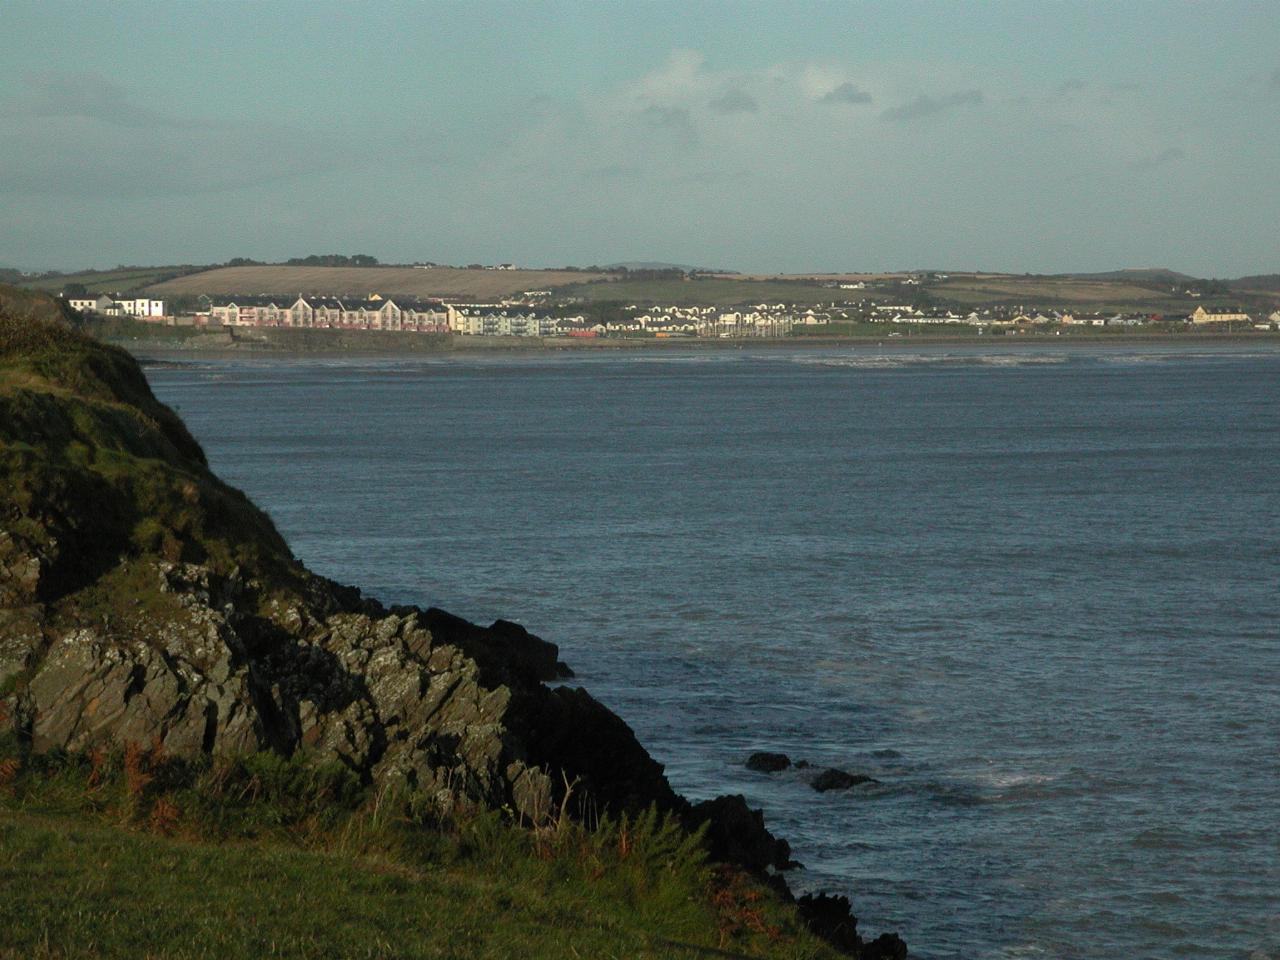 From Gt Newtown Head on west side of Tramore Bay - looking towards Tramore